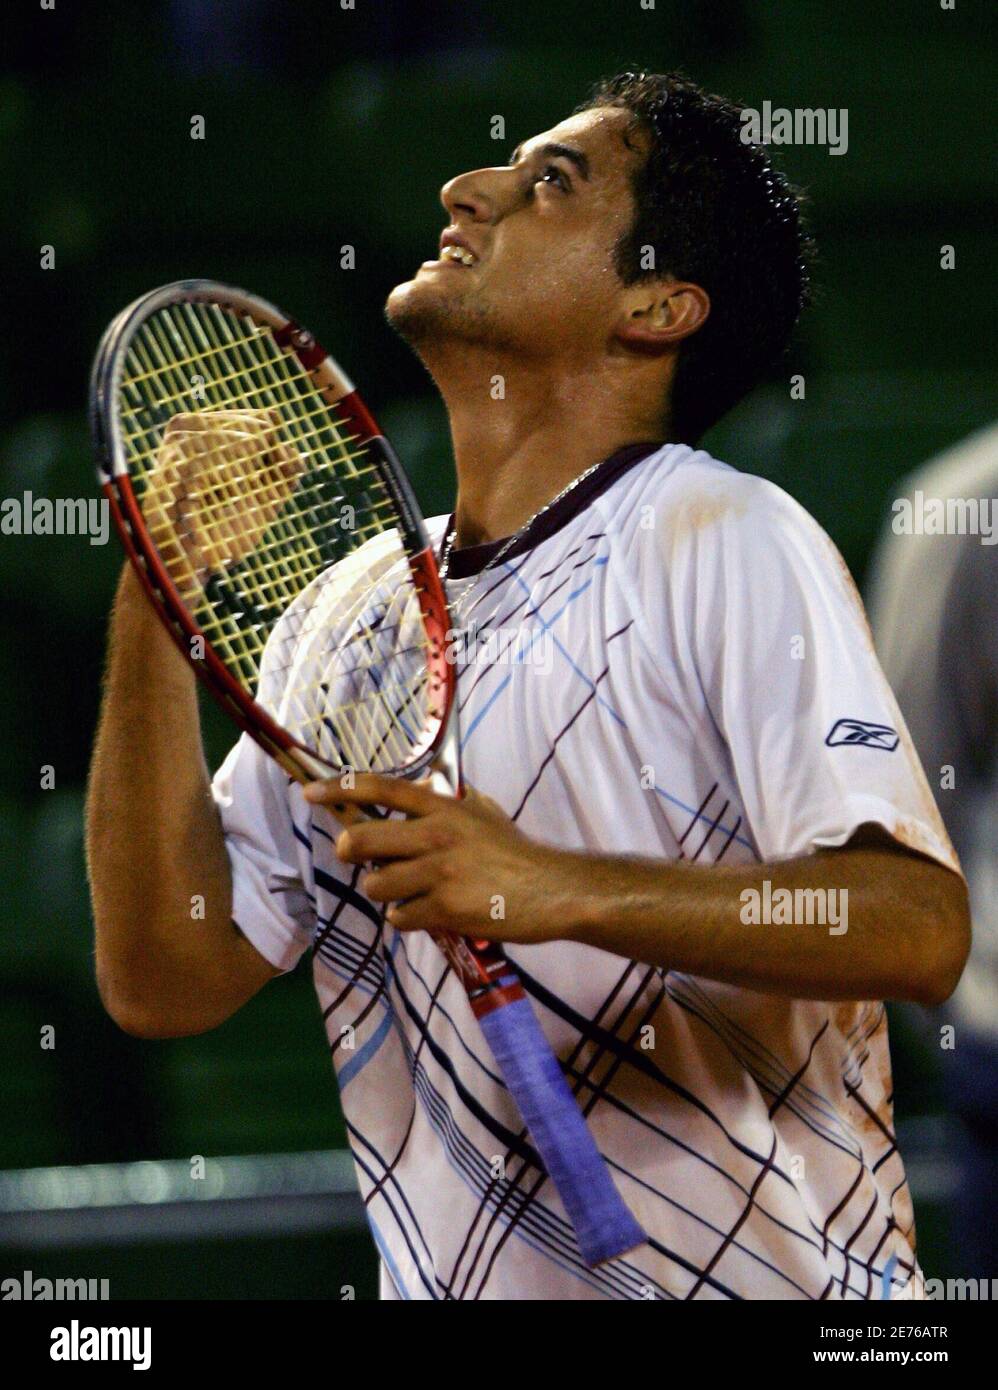 Nicolas almagro of spain hi-res stock photography and images - Alamy